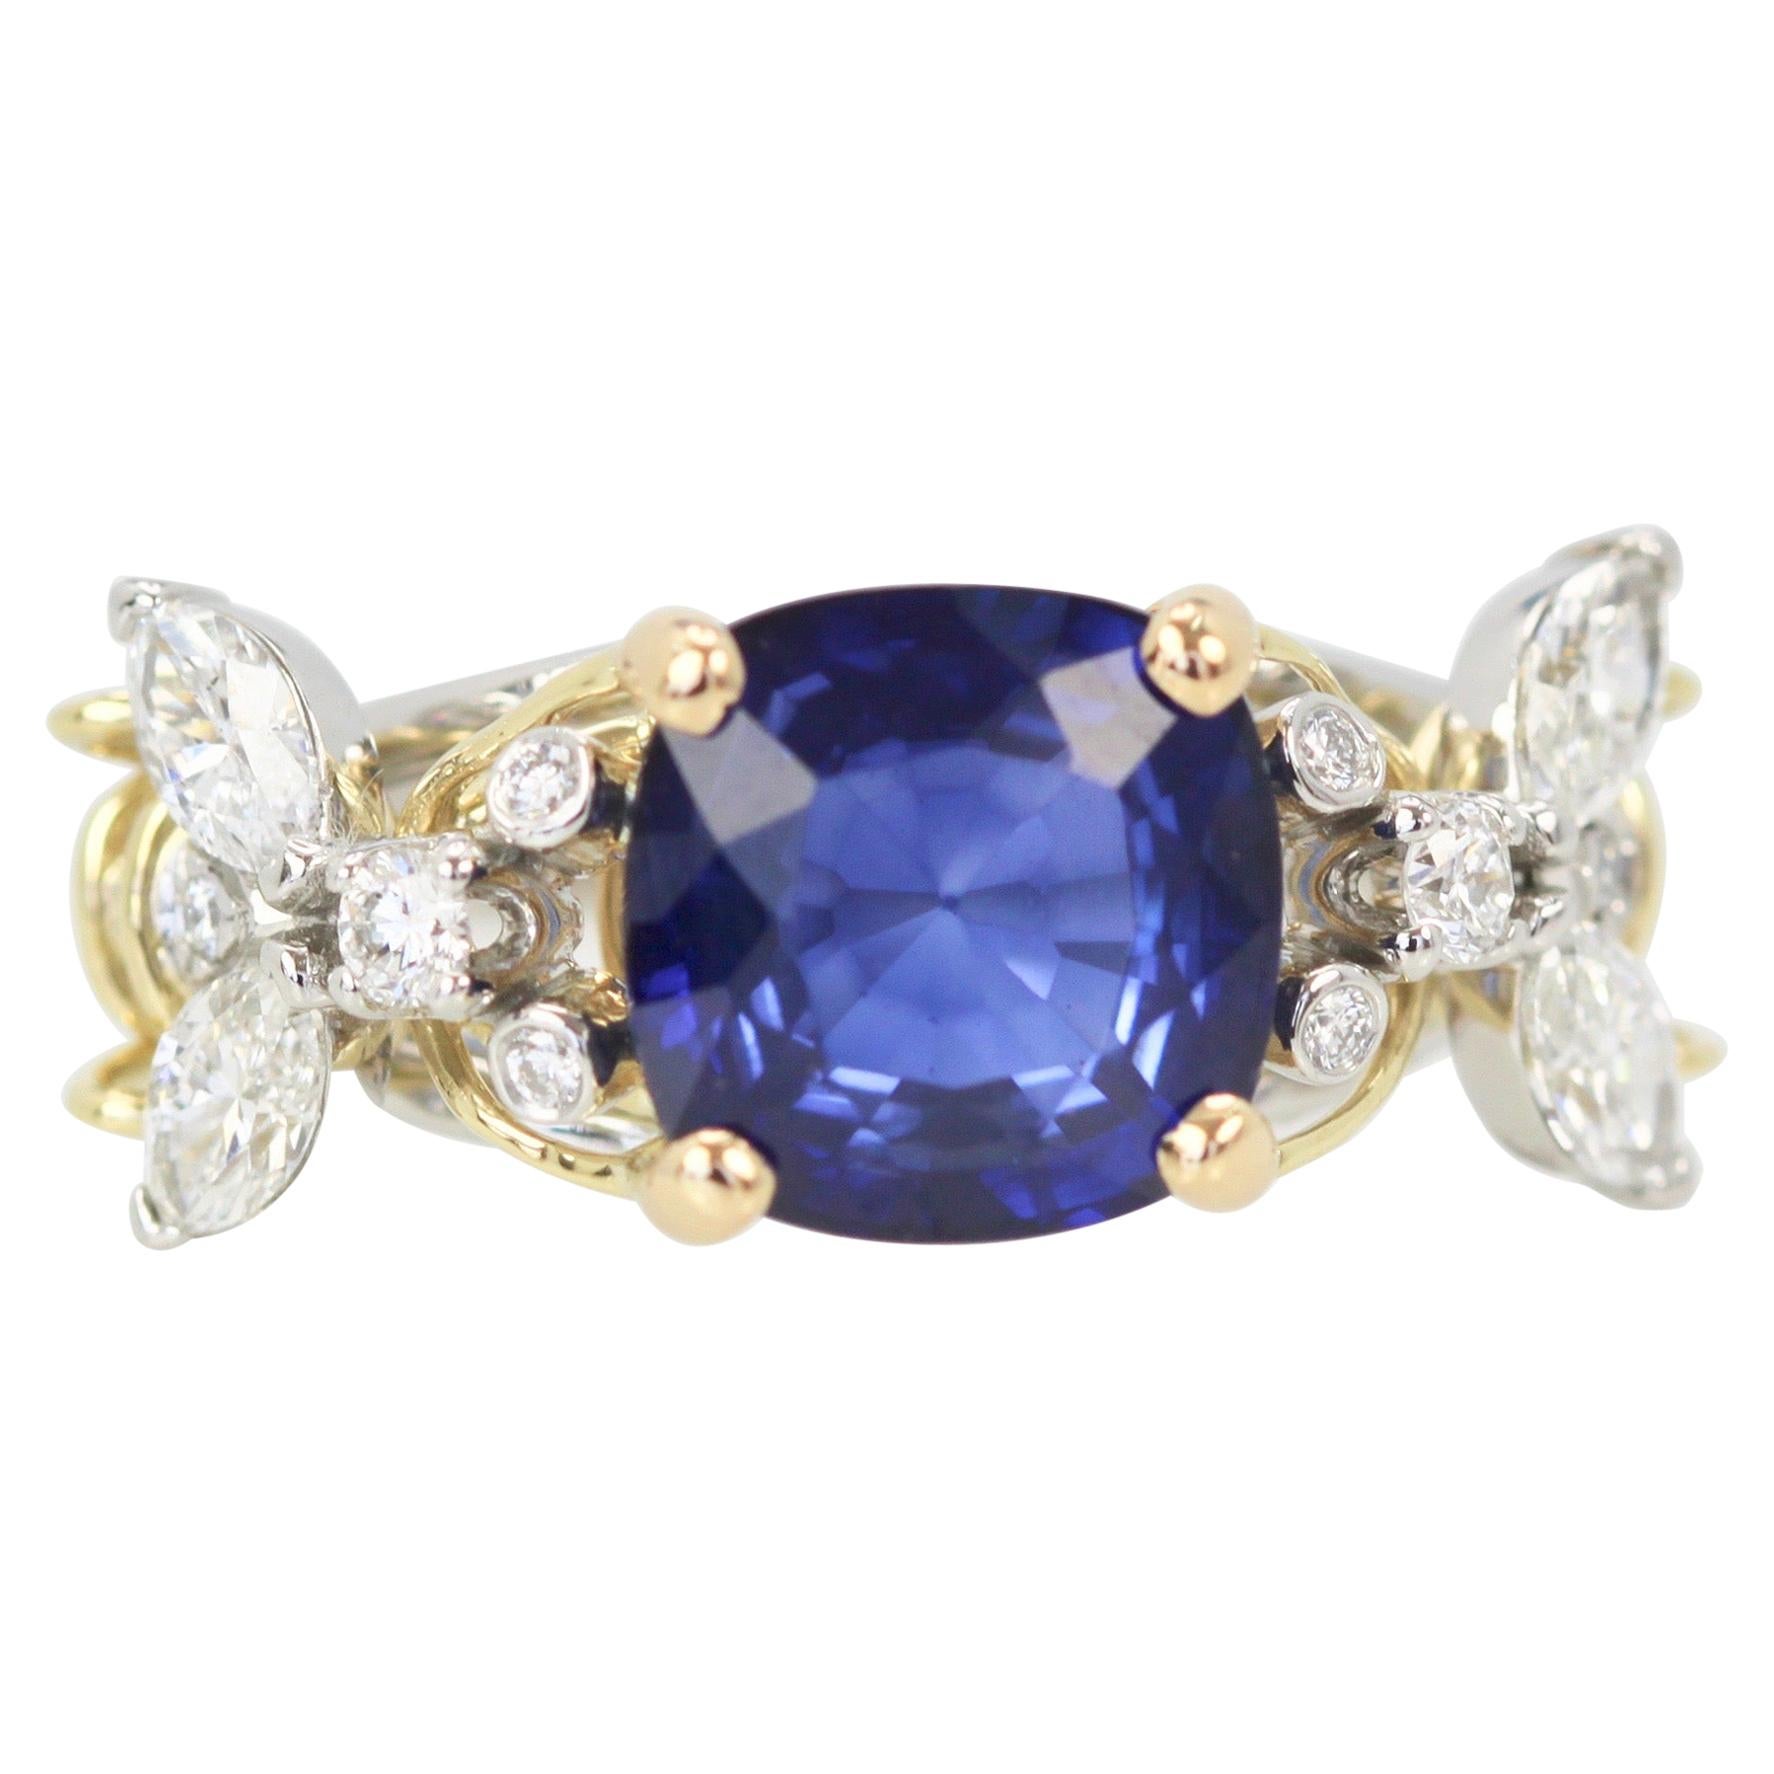 Tiffany & Co. Schlumberger Double Bee Ring with Blue Sapphire Diamonds